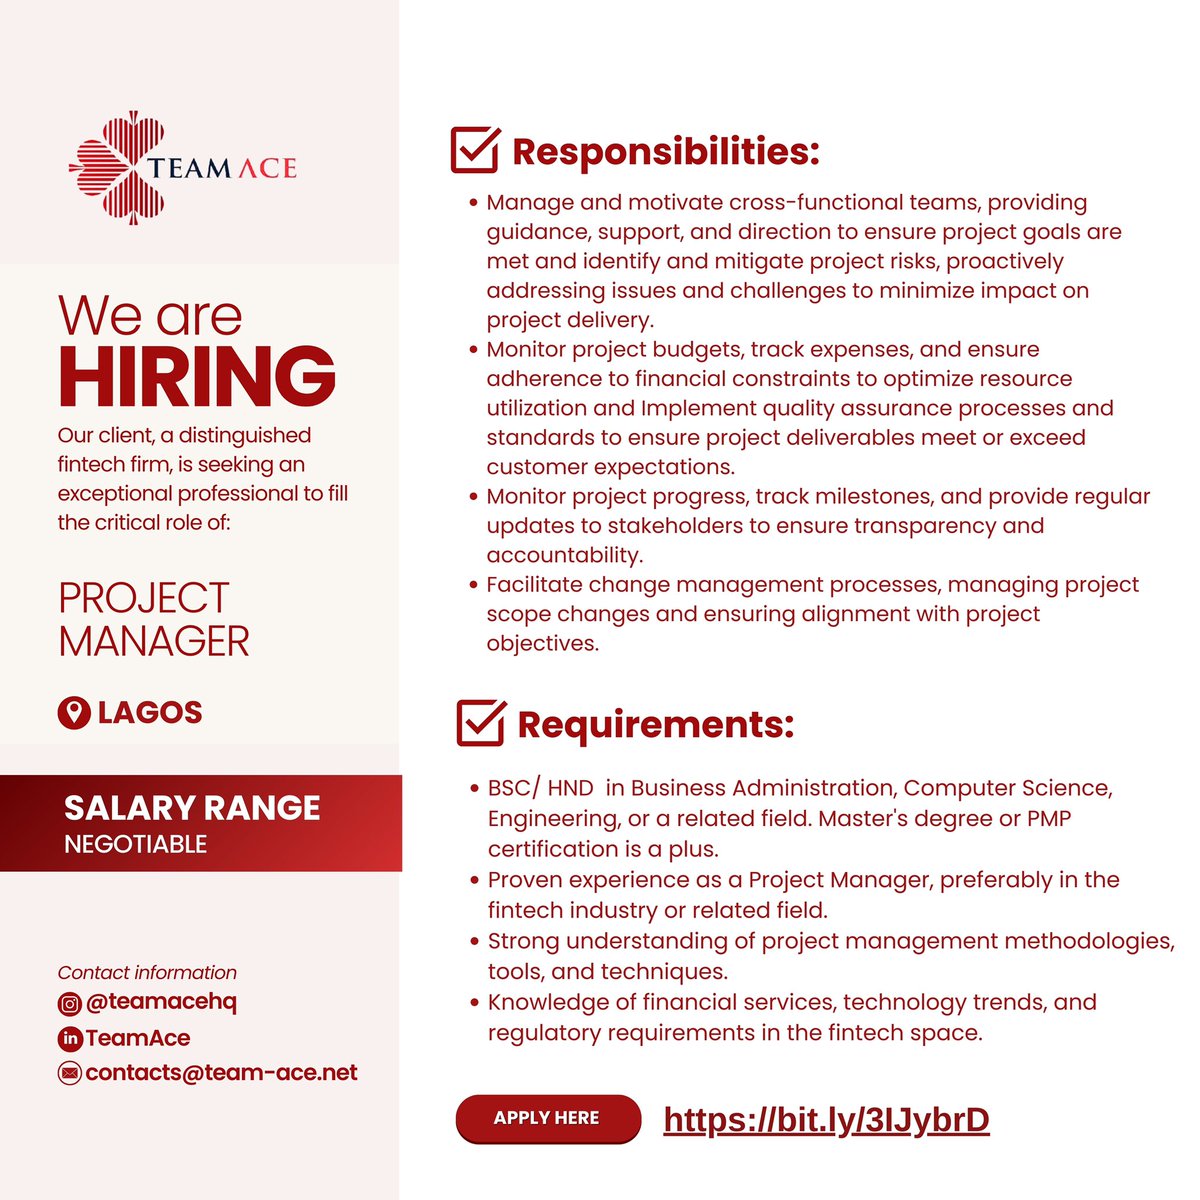 Job Opening!!!!

Qualified and Interested? Apply here👇
bit.ly/3IJybrD

#projectmanagerjobs #projectmanagement #jobopening #hiringnow #hiring #jobsinnigeria #recruiting #vacancy #teamace